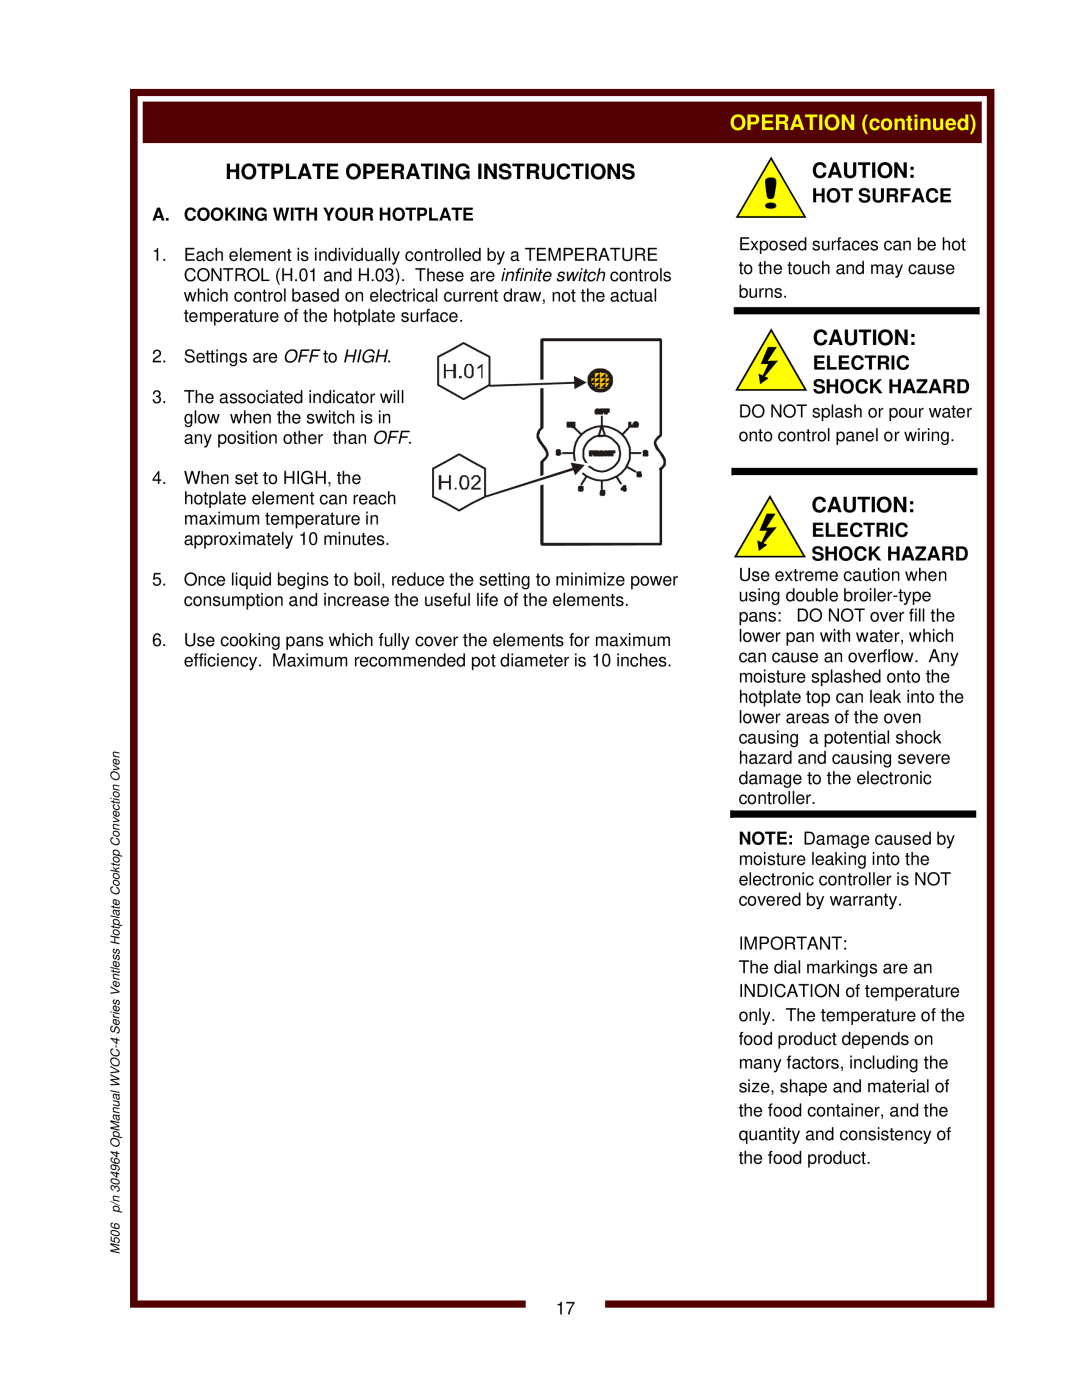 Wells WVOC-4HS operation manual Hotplate Operating Instructions, OPERATION continued, Hot Surface, Electric Shock Hazard 